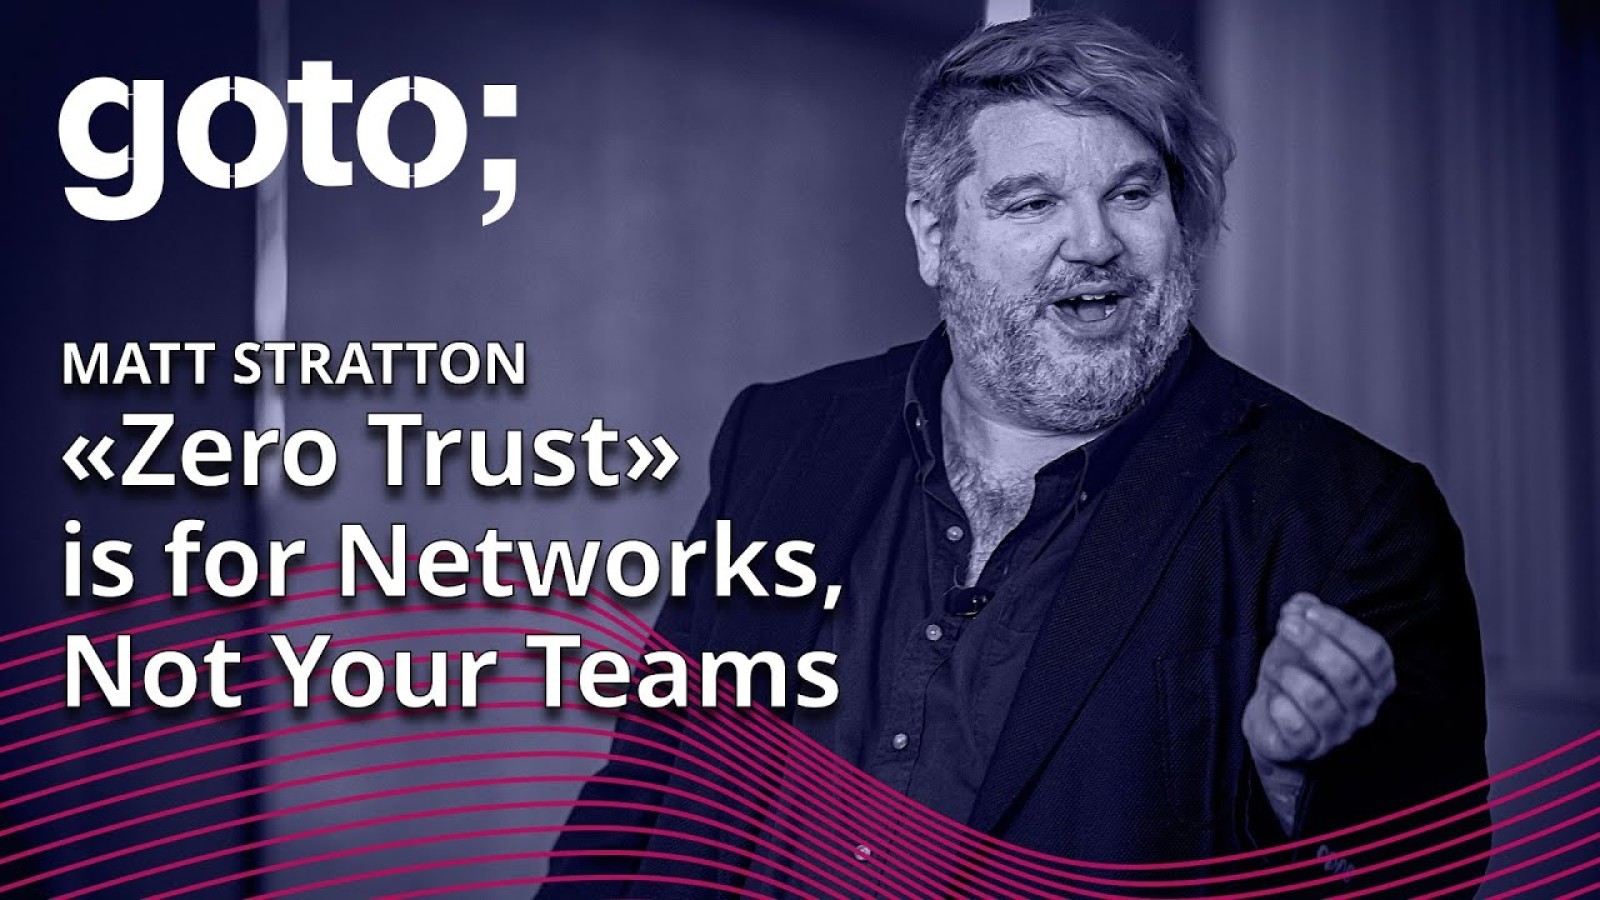 Zero Trust is for Networks, Not Your Teams